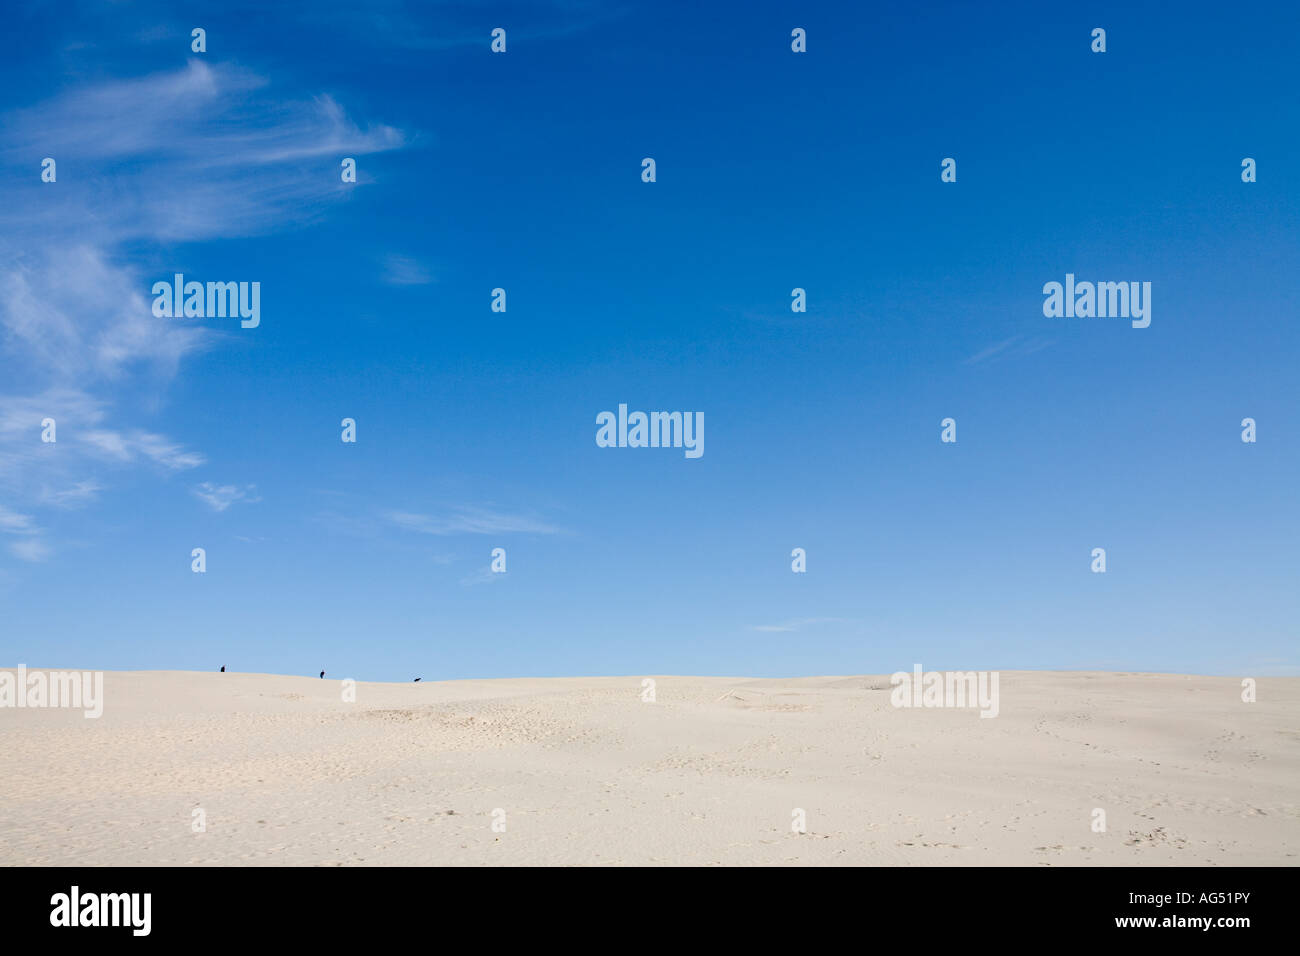 Two Men a Dog with Sand and Sky Under a large blue sky Stock Photo